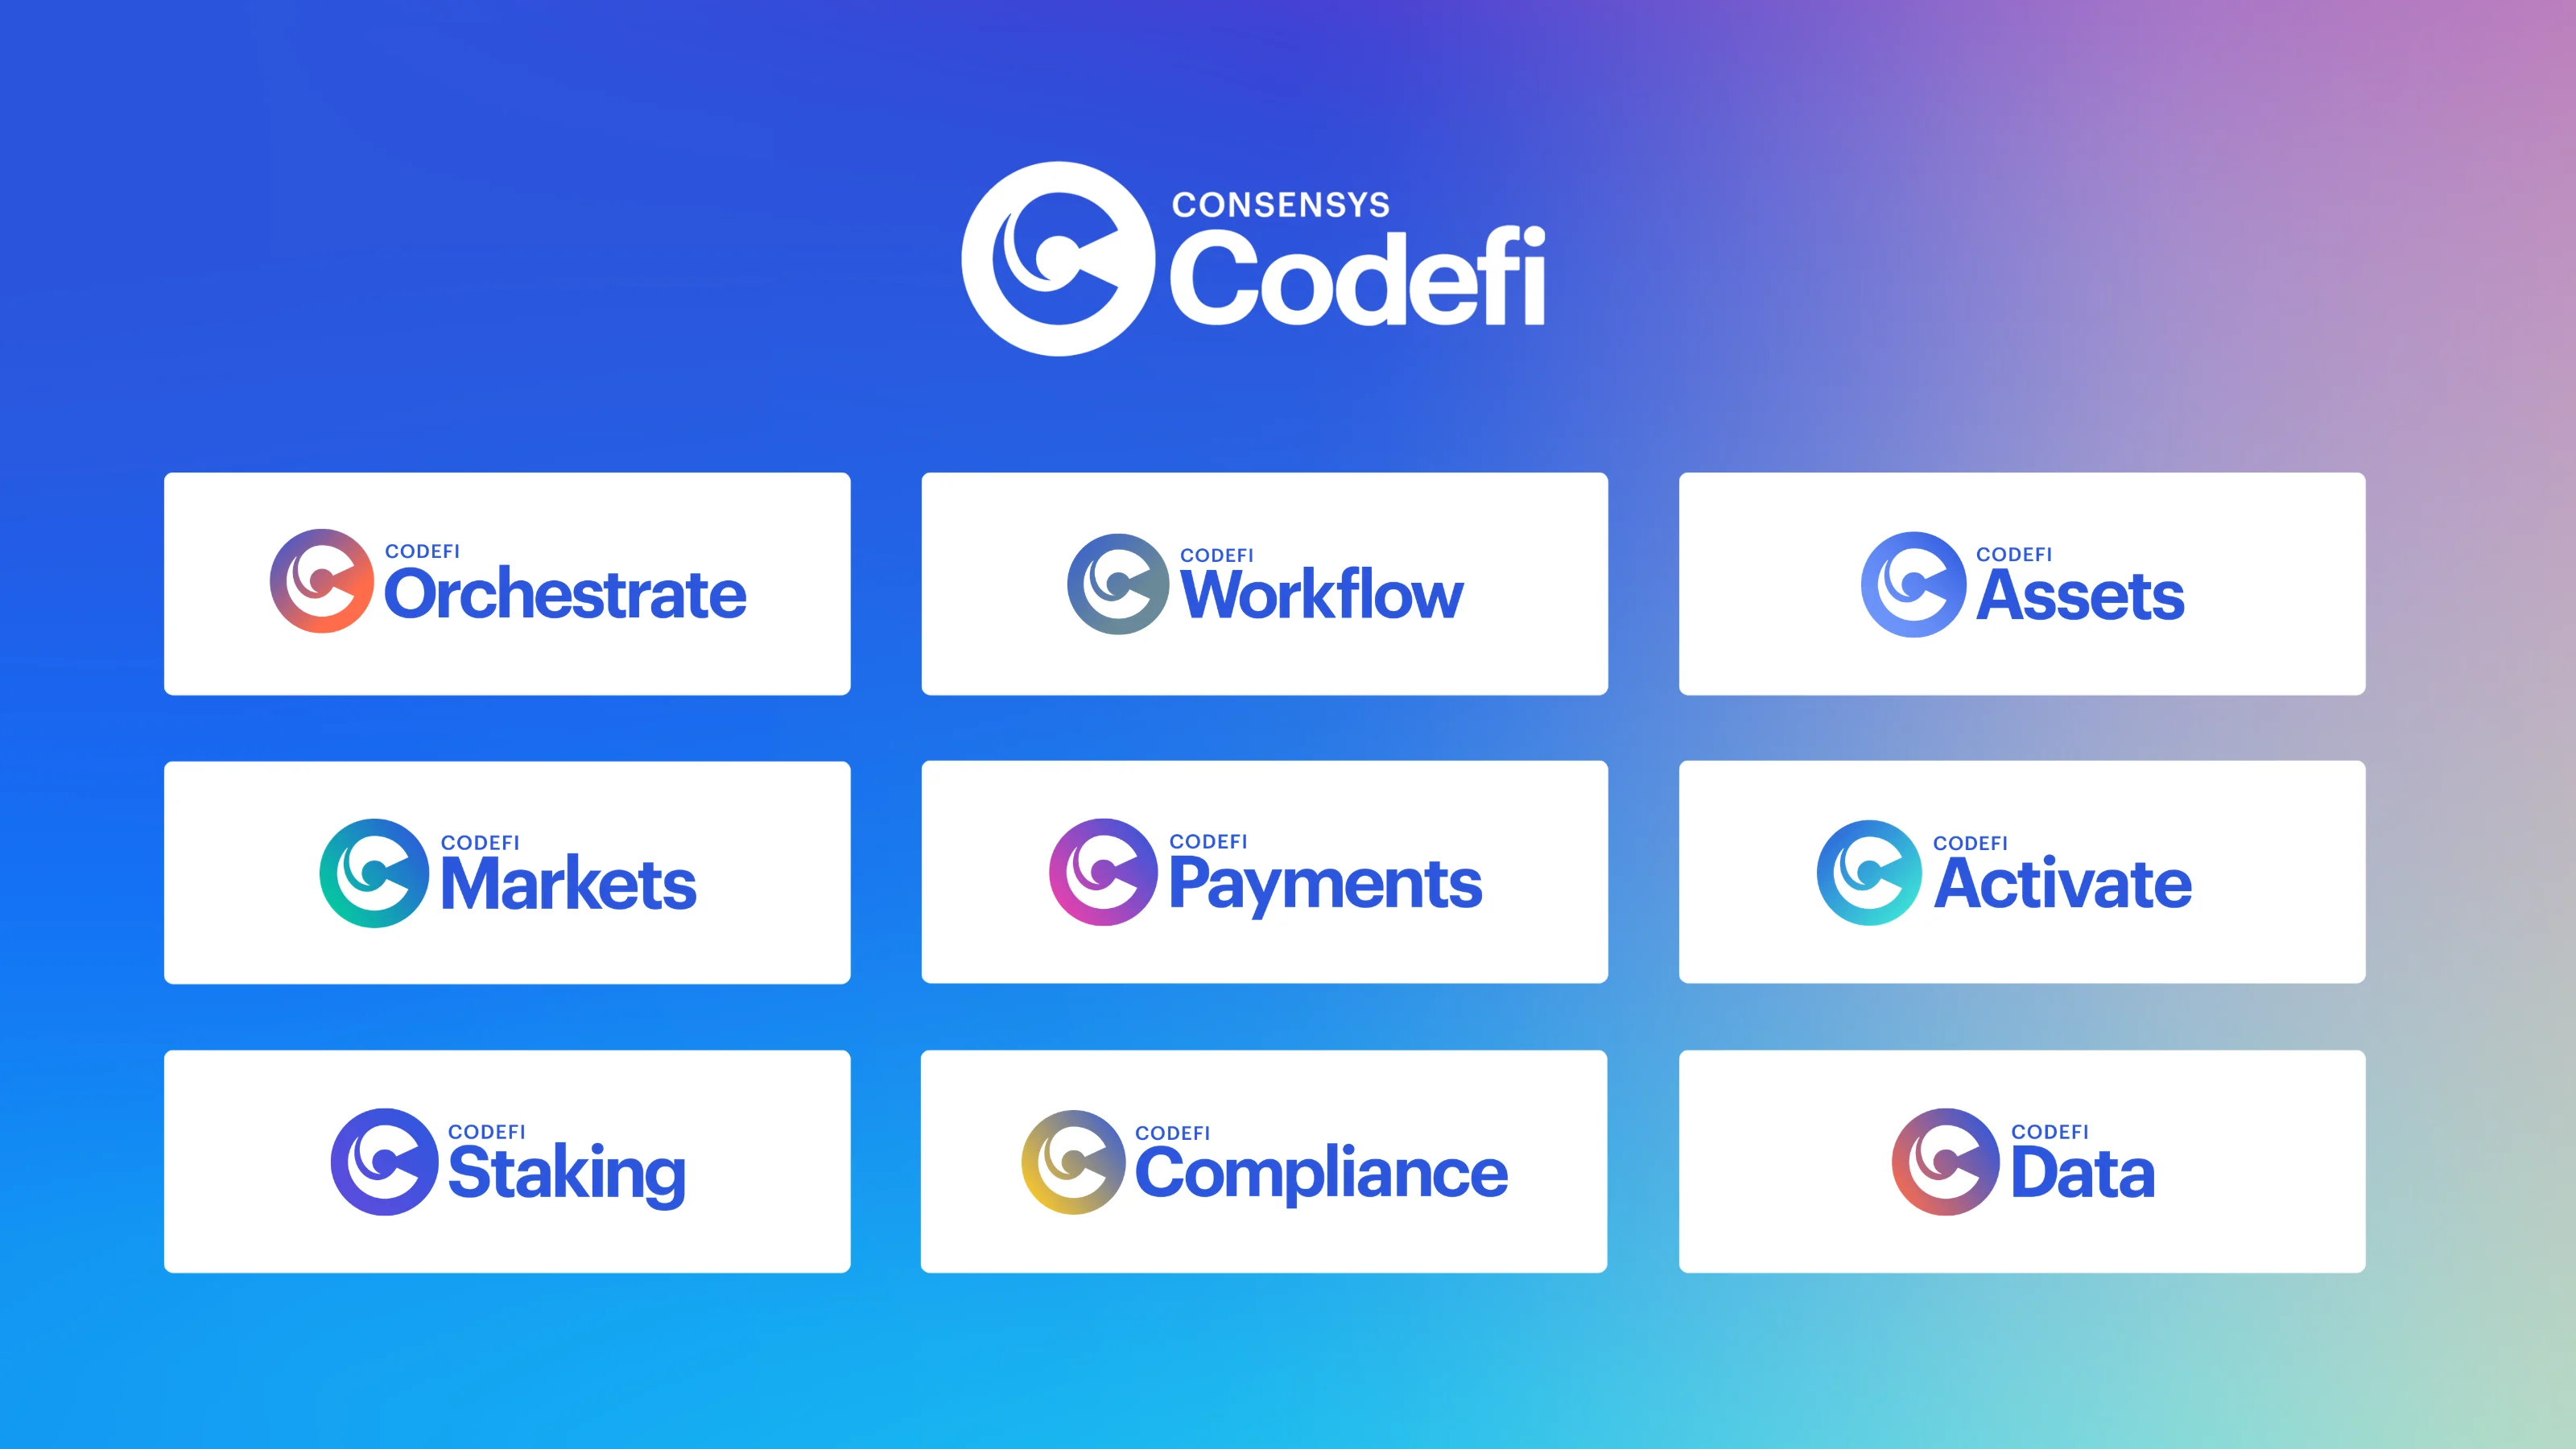 Image: What is the Codefi Blockchain Application Suite?